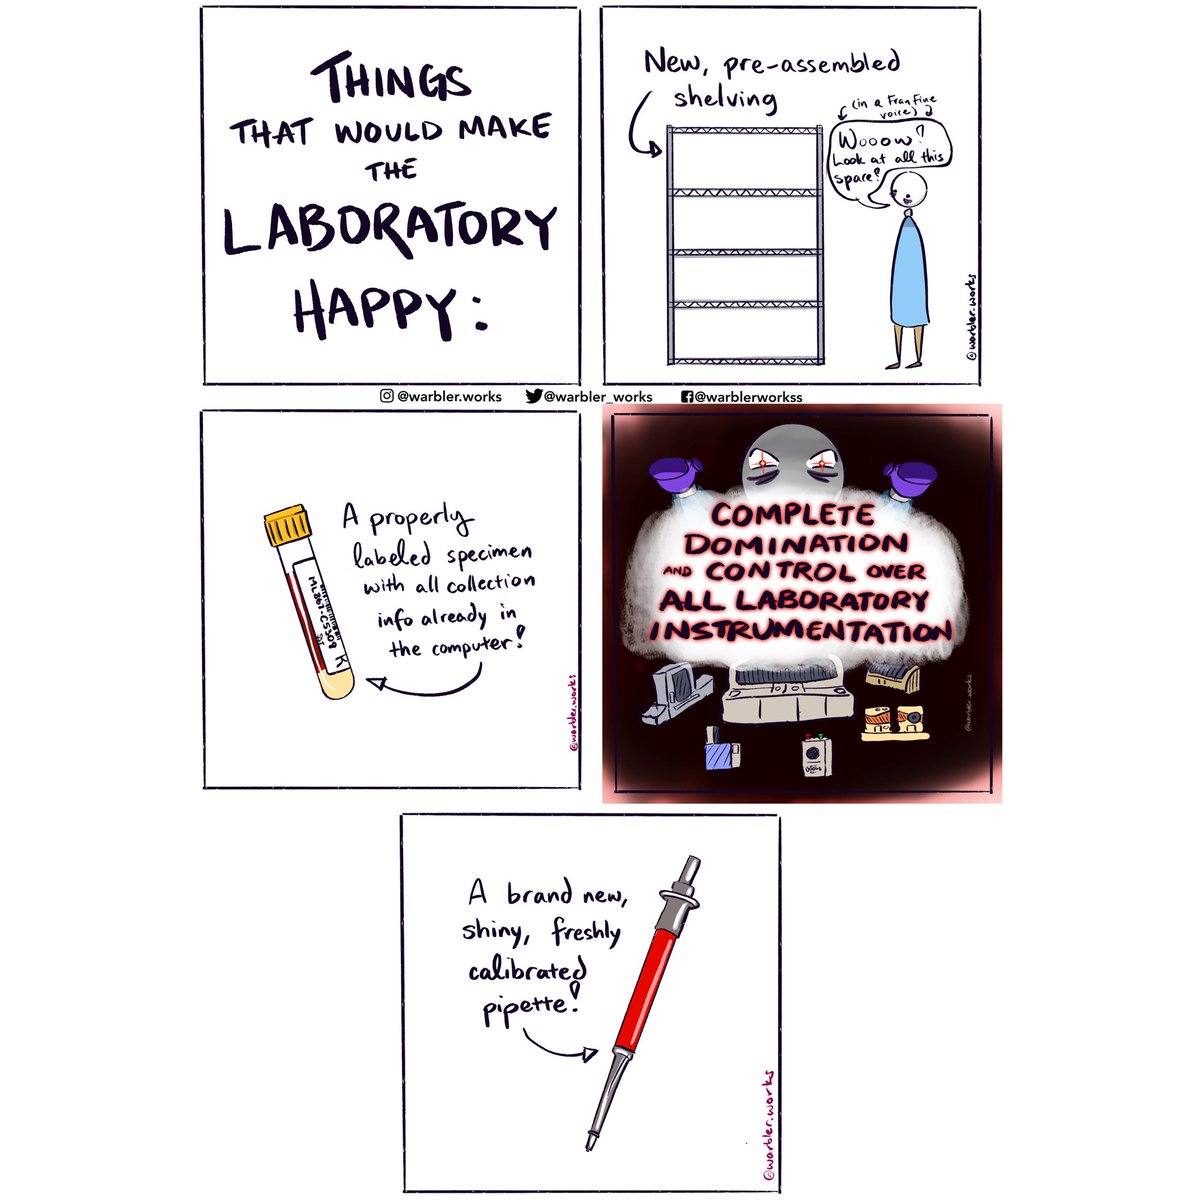 Let’s be real, who doesn’t want complete control and domination over laboratory instruments? Not just me, right? Right?!

 #medicallaboratoryscientist #lablifeproblems #lab4life #lablife #labtechlife #labvocate #loveforlabpros #laboratory #laboratorylife